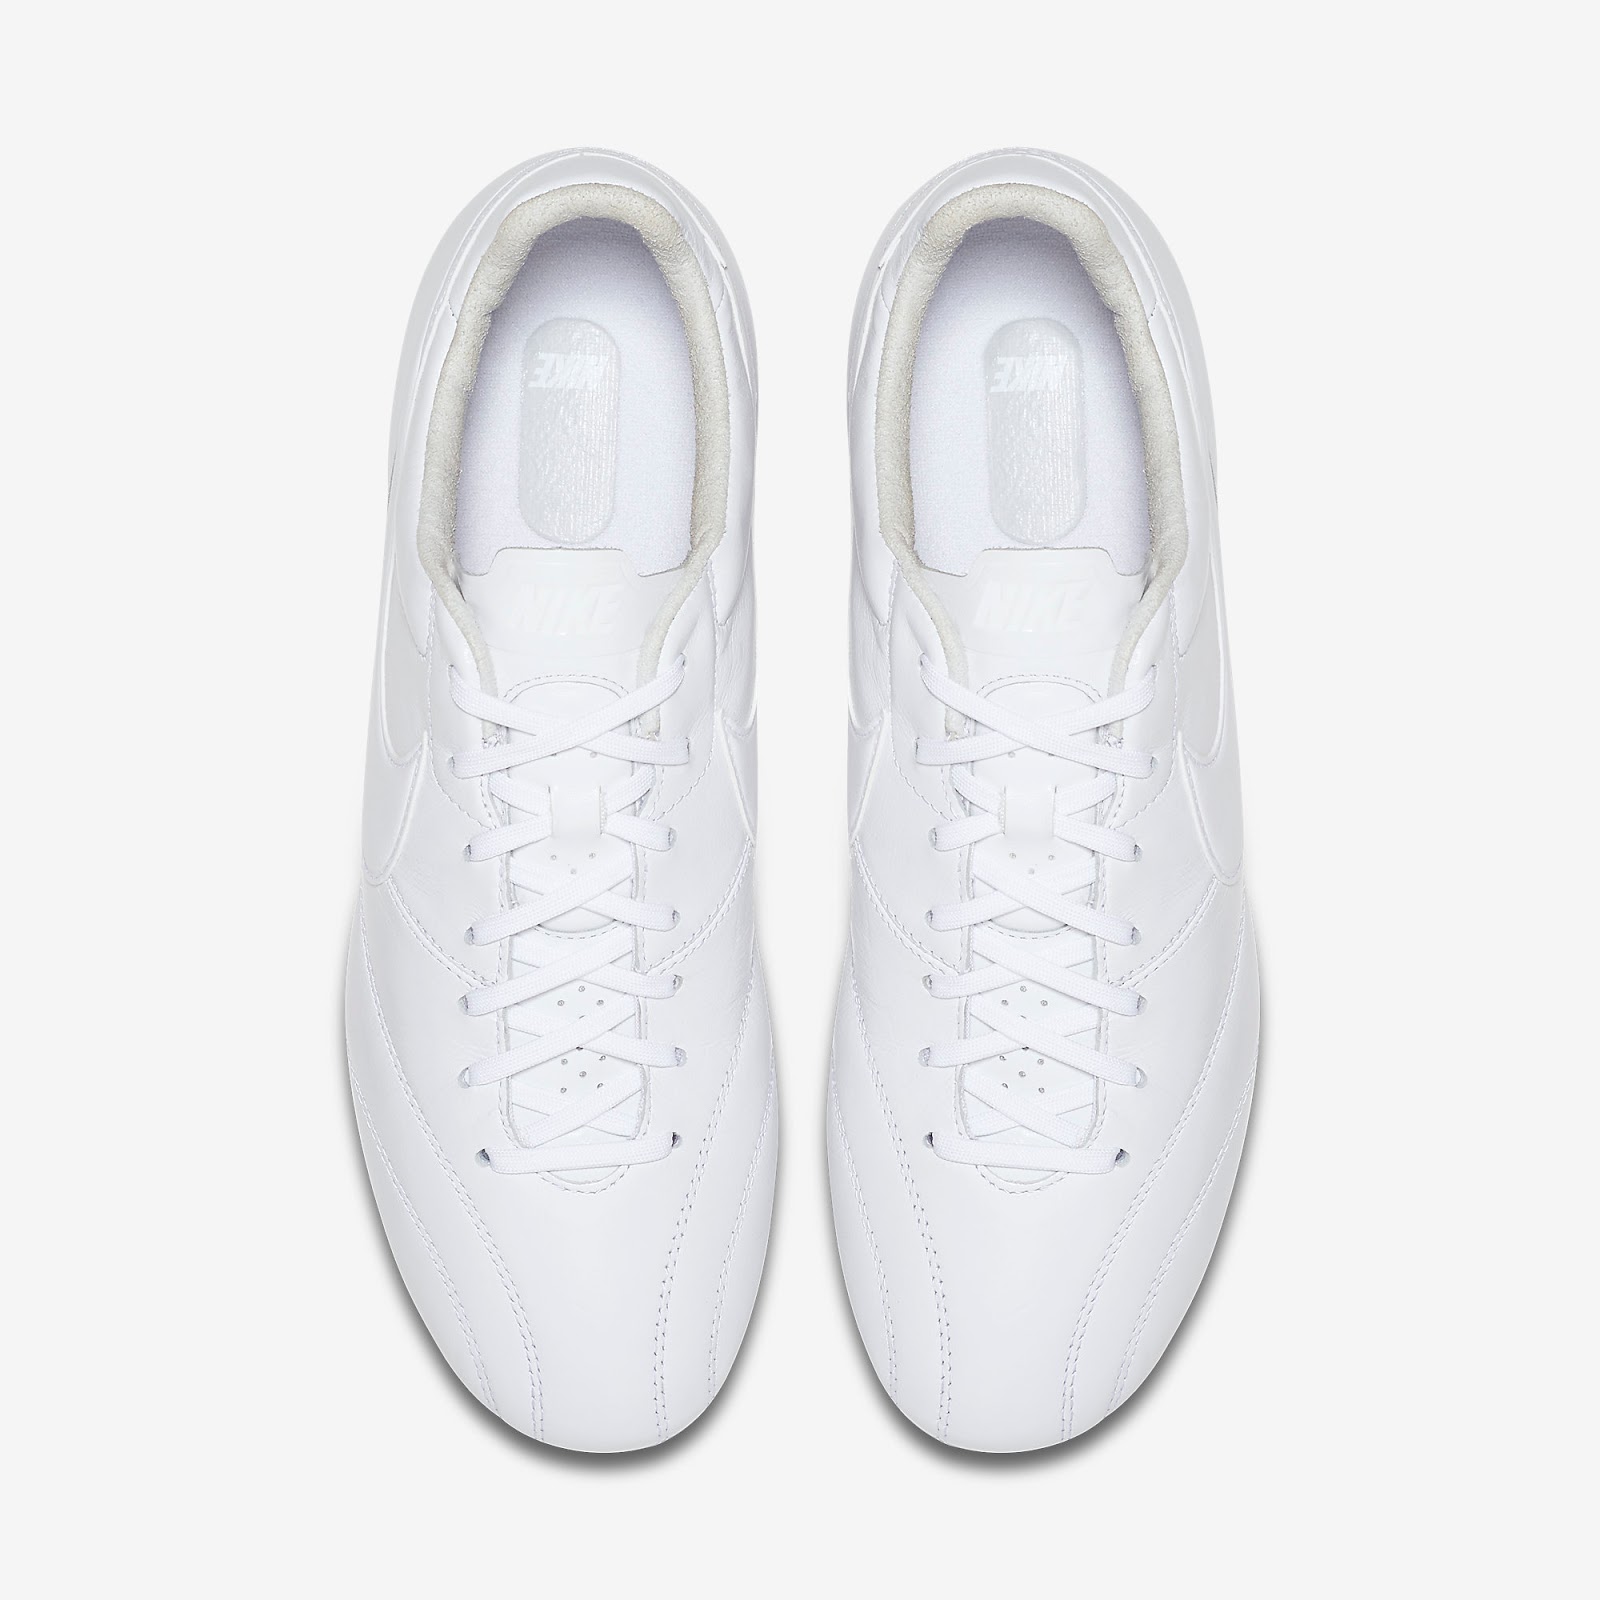 Now Available in the USA: Blackout and Whiteout Nike Premier - Footy ...